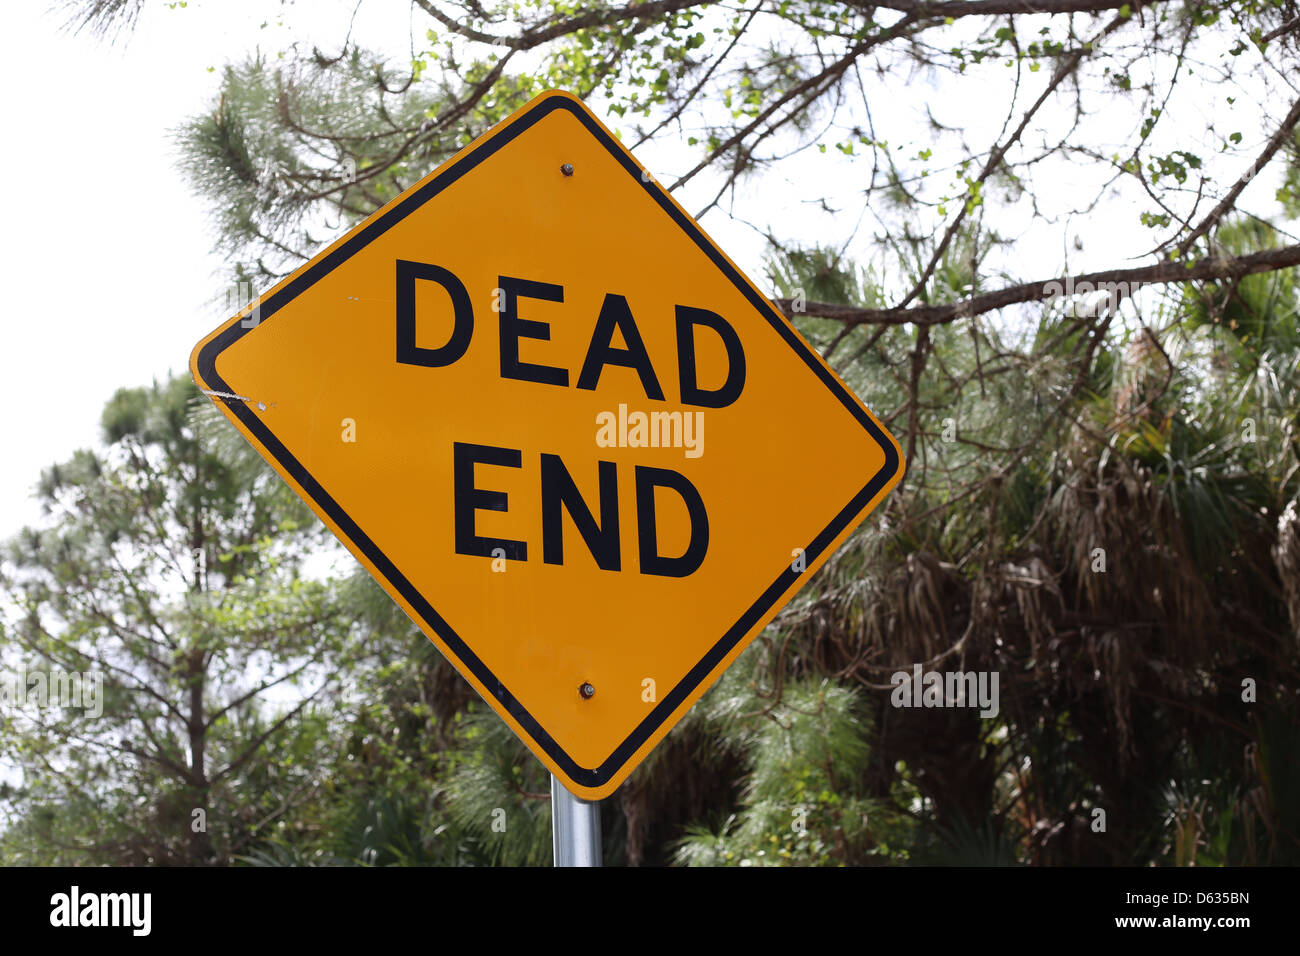 A yellow caution dead end street or road sign Stock Photo